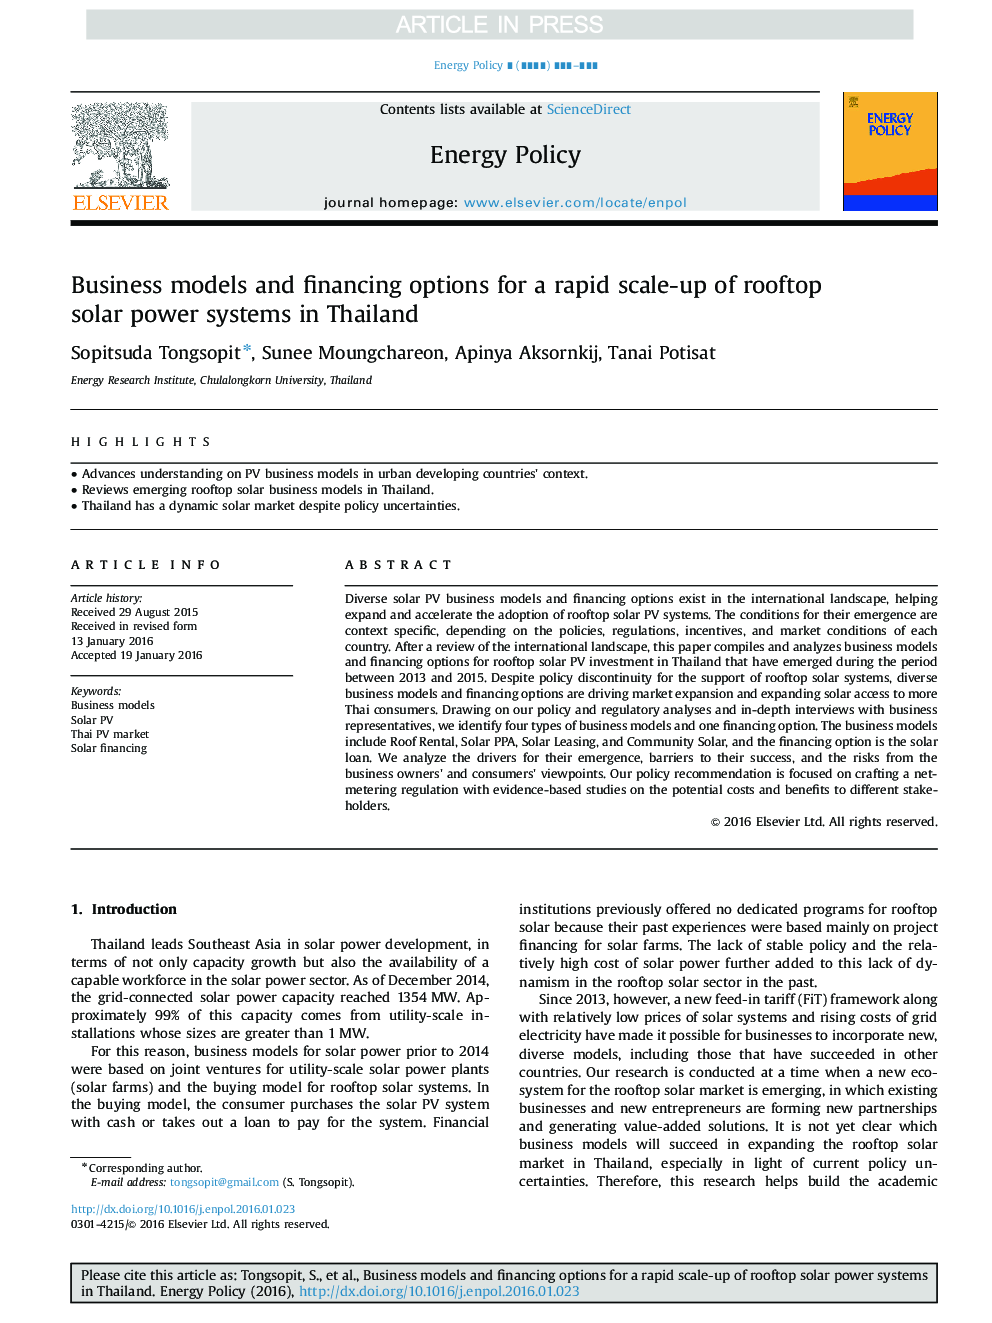 Business models and financing options for a rapid scale-up of rooftop solar power systems in Thailand